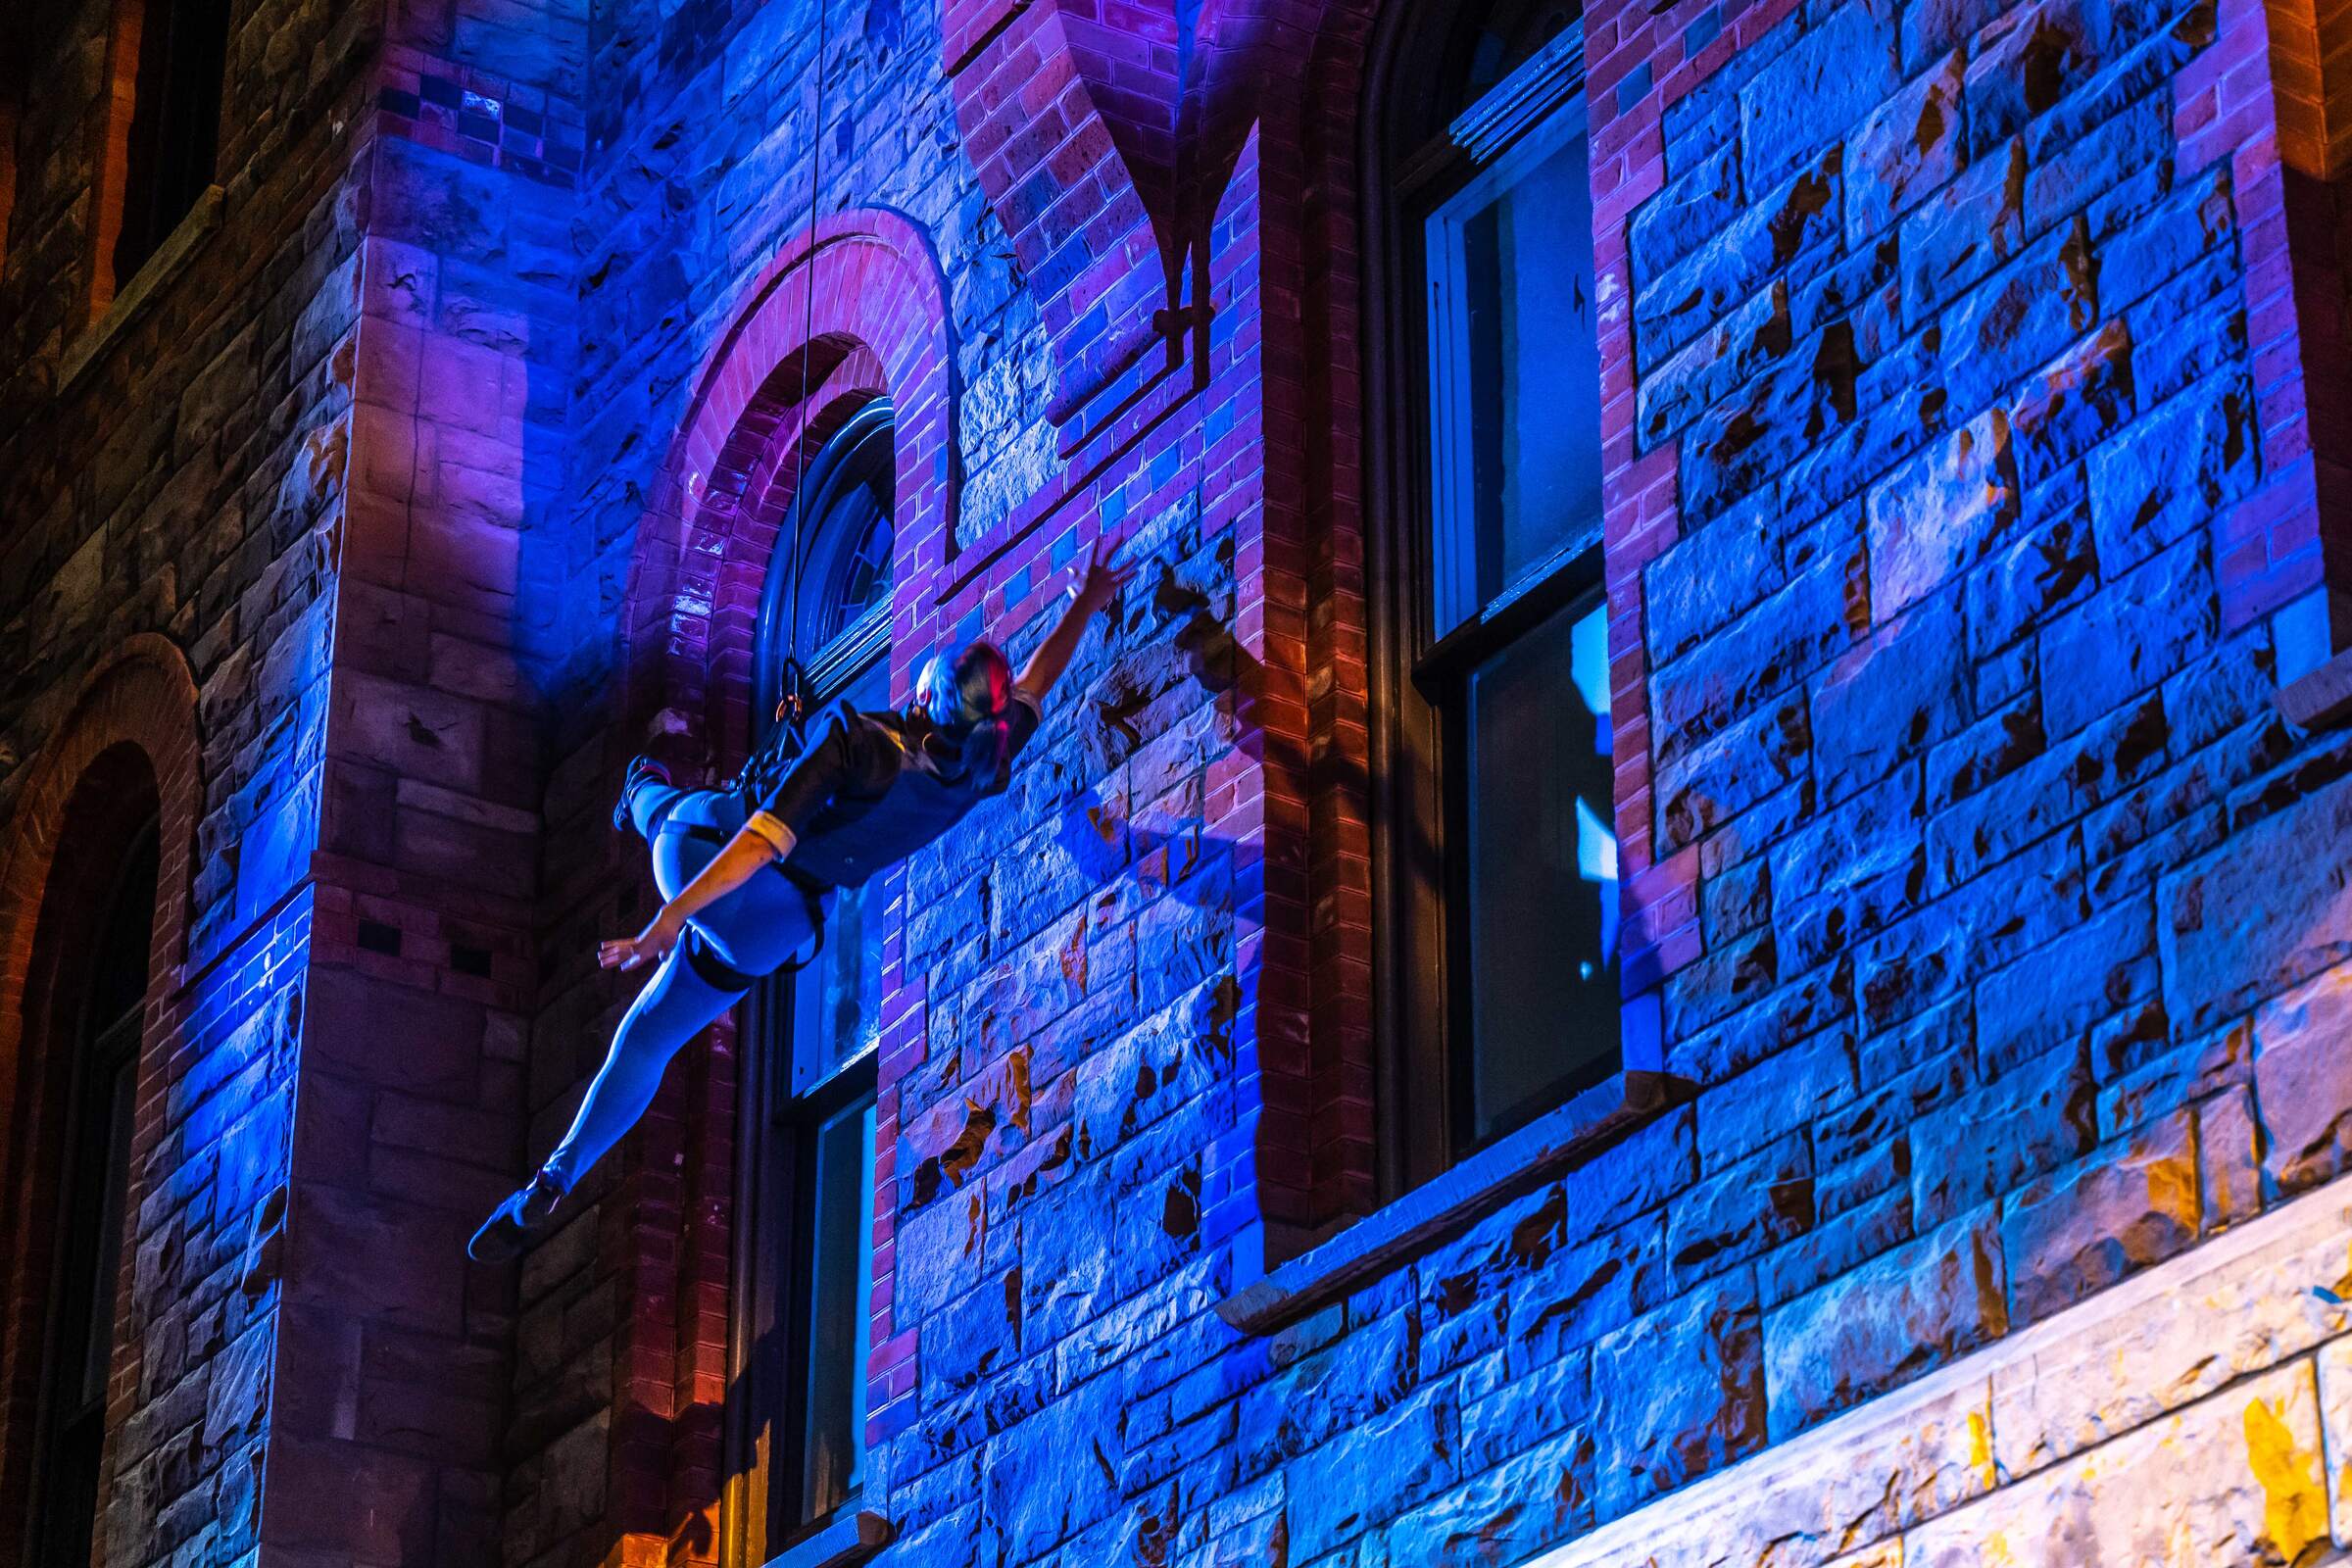 A woman hangs from a climbing harness, suspended next to a brick wall. The entire scene is bathed in dark blue light.